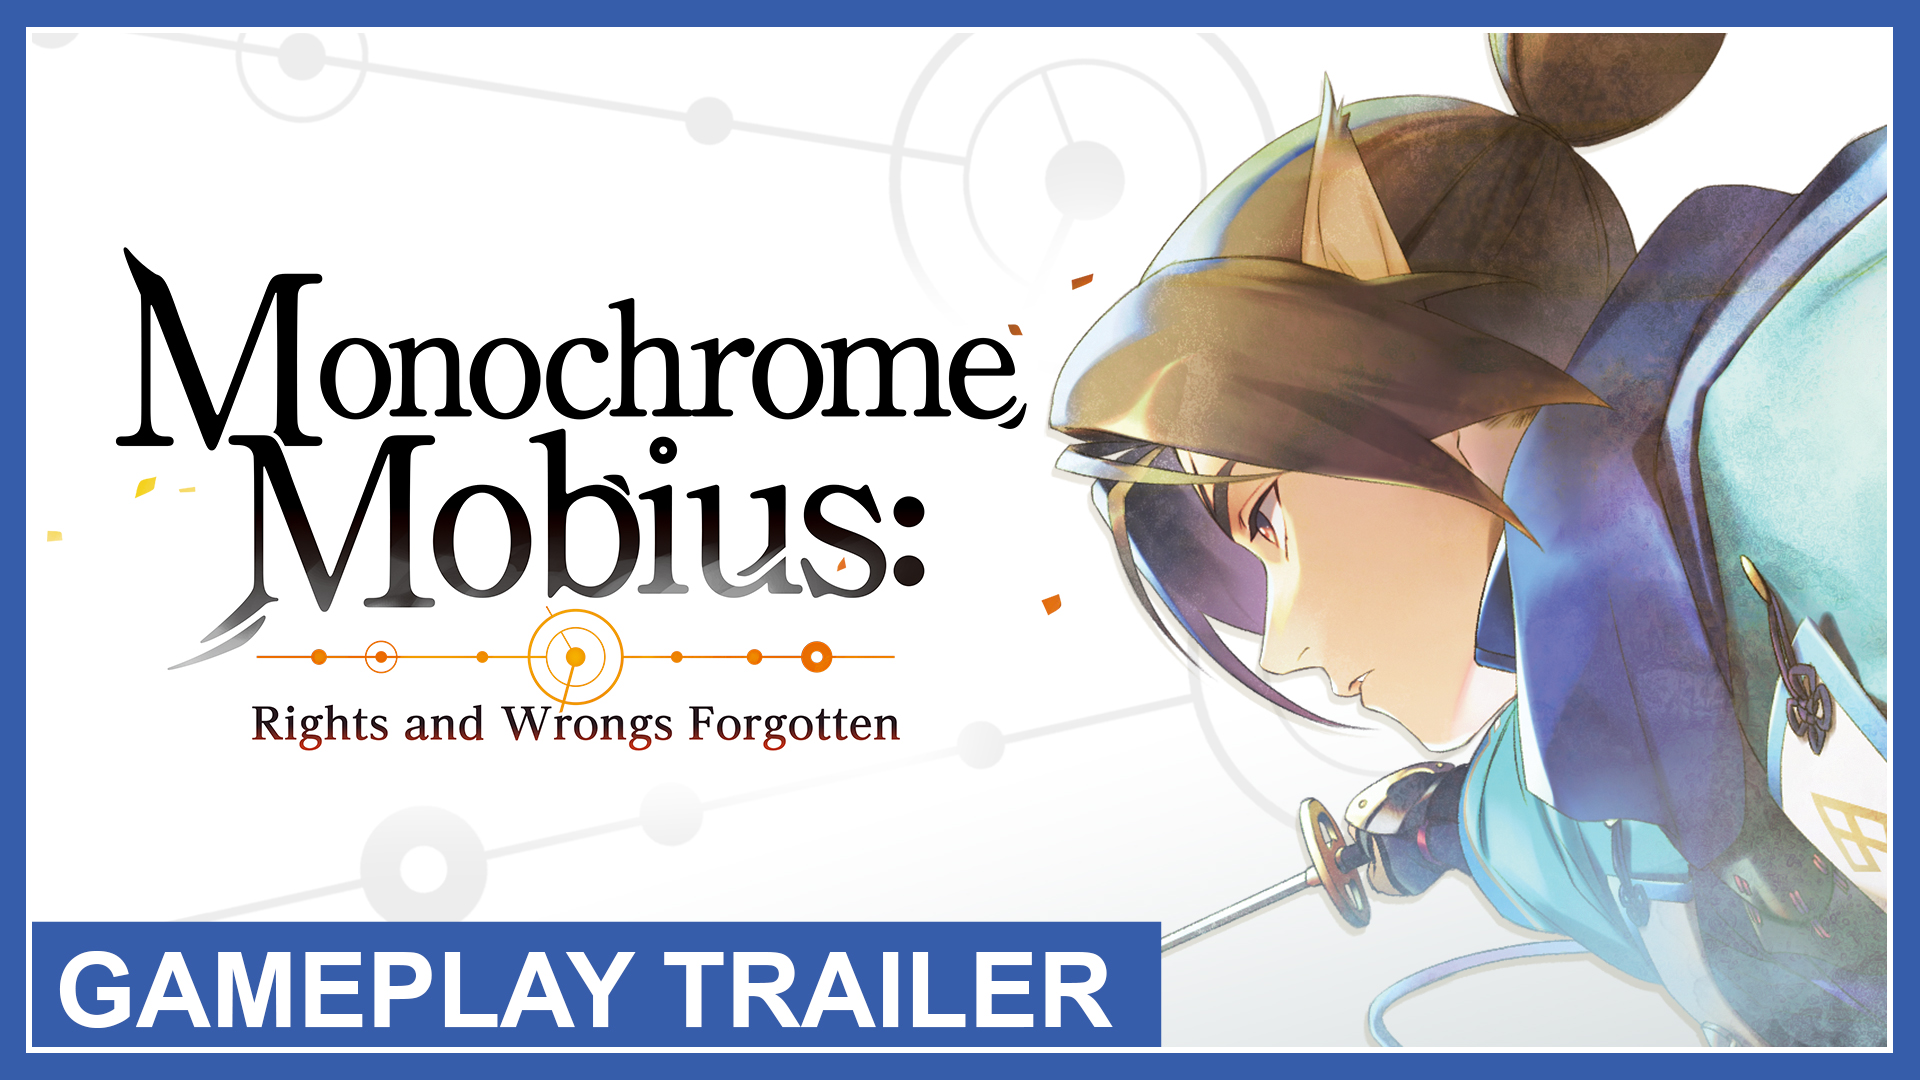 Monochrome Mobius: Rights and Wrongs Forgotten - noticia